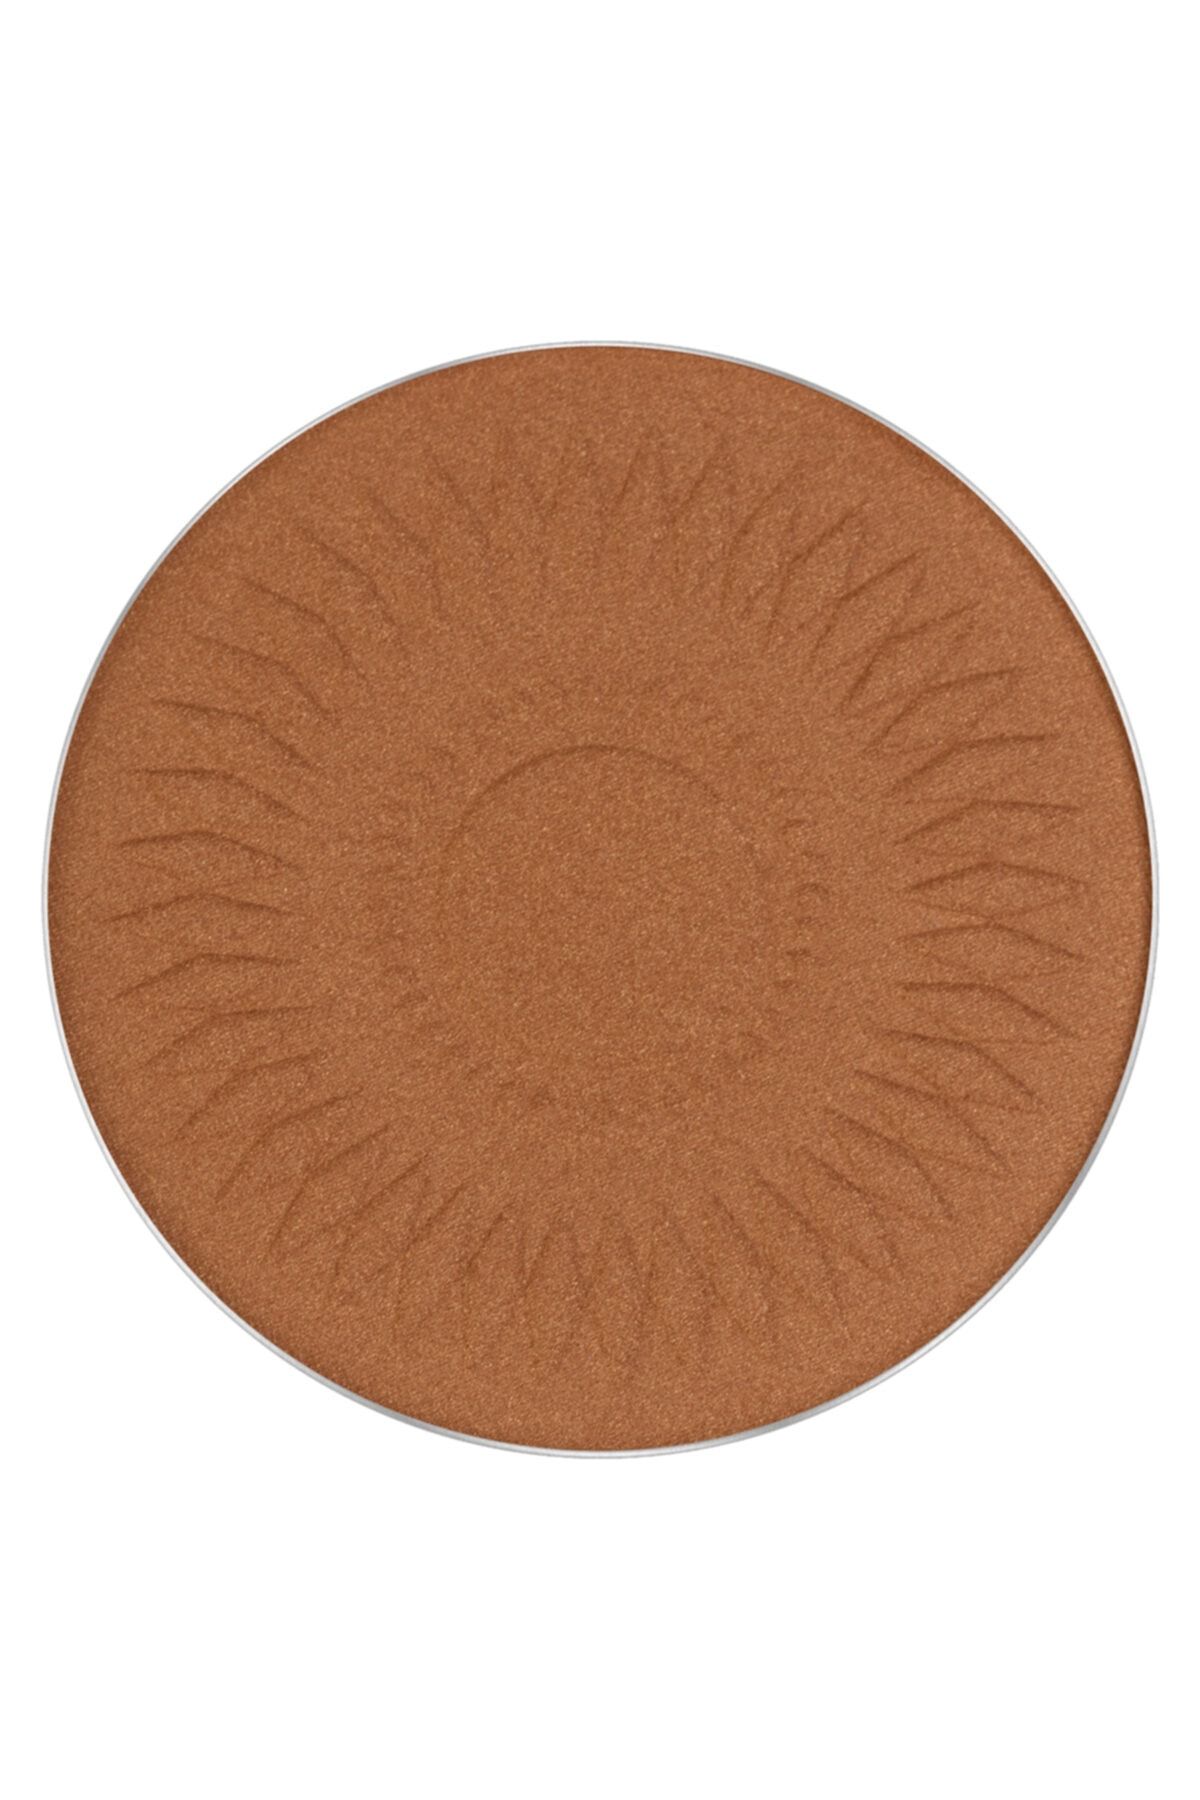 Inglot Fr Sys Always The Sun Glow Face Bronzer 702